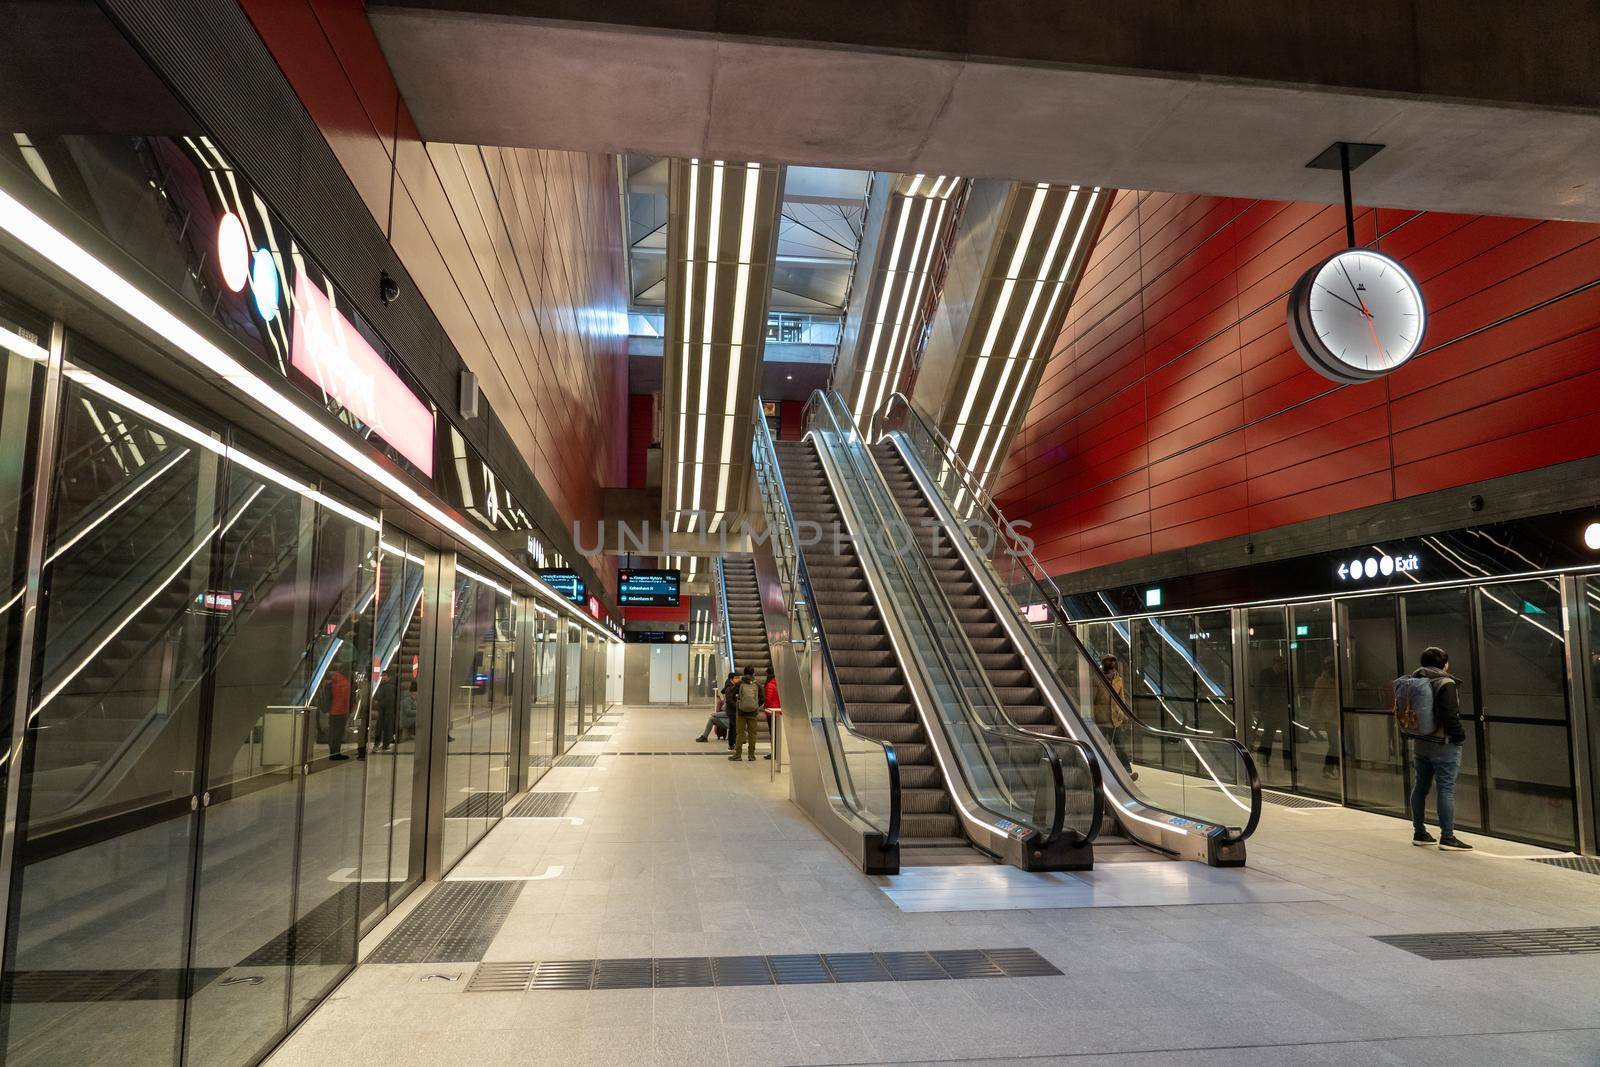 Copenhagen, Denmark - March 01, 2022: Interior view of the metro station Osterport on the City Circle Line